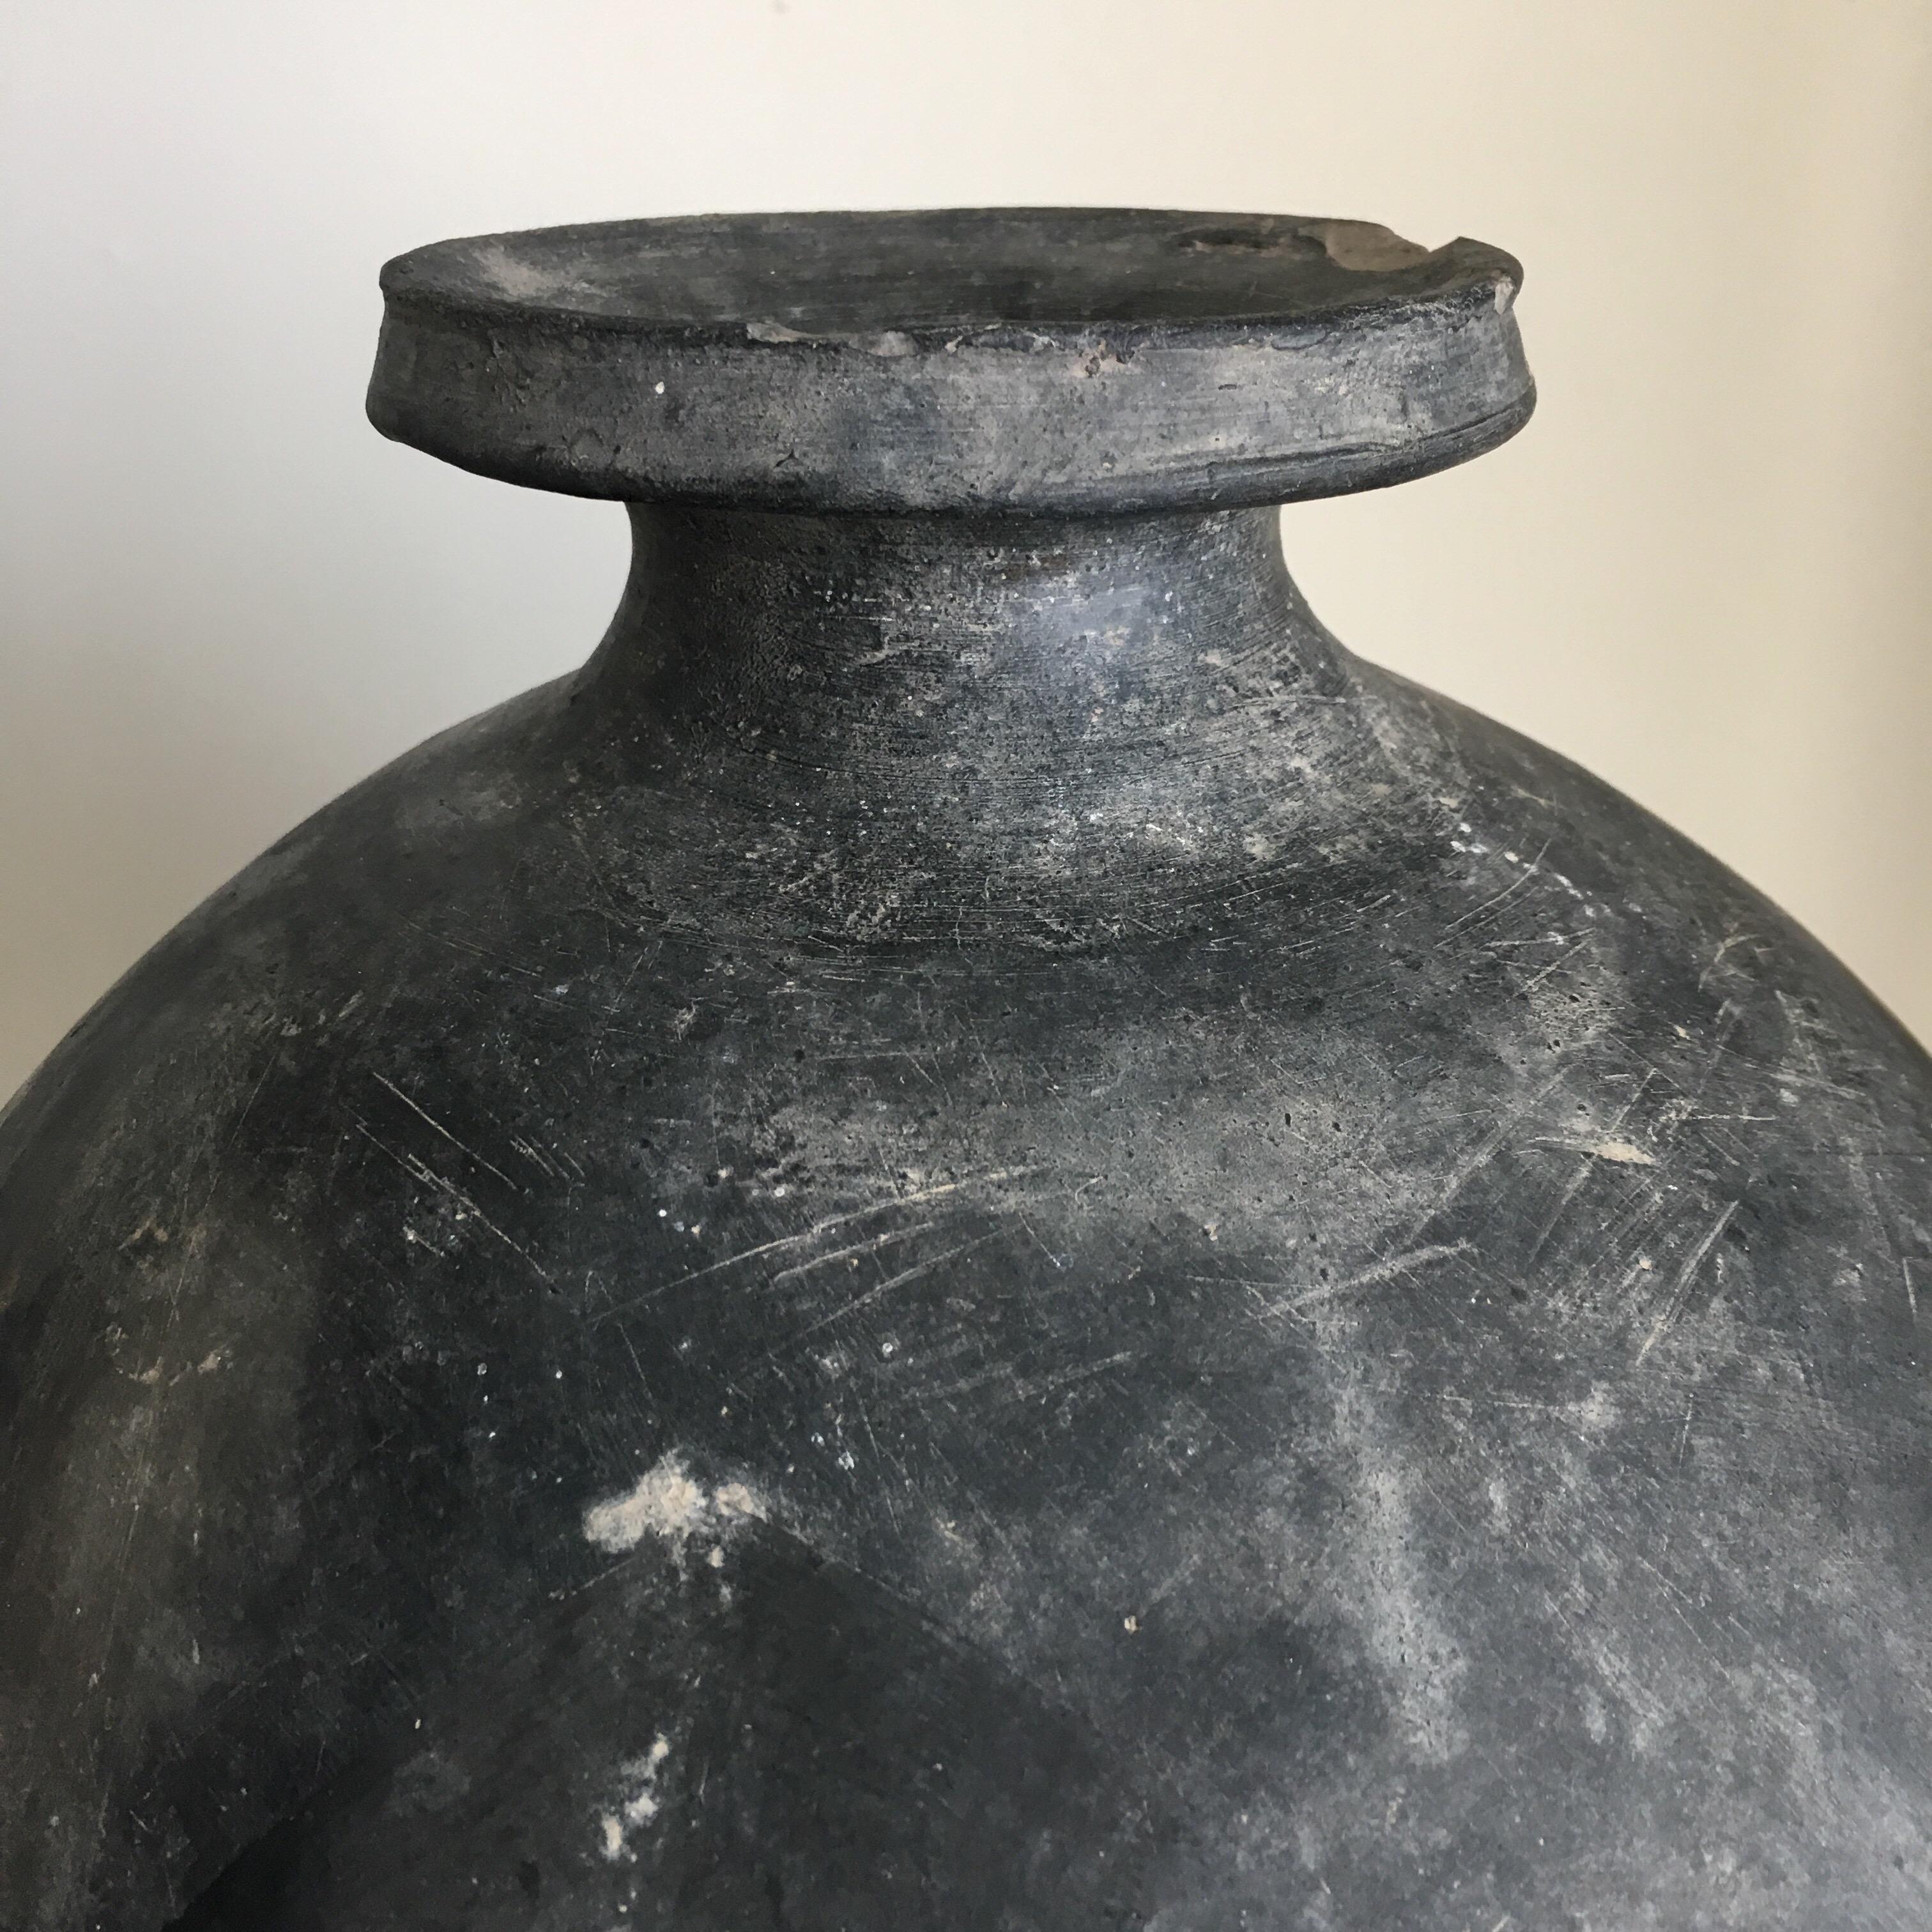 Ceramic mezcal pot from San Bartolo Coyotepec, Oaxaca, Mexico. Engraved 1957. Used to transport mezcal or pulque by way of donkey from harvest villages. Its egg-shape ensures the highest strength possible. Black clay is only sourced from San